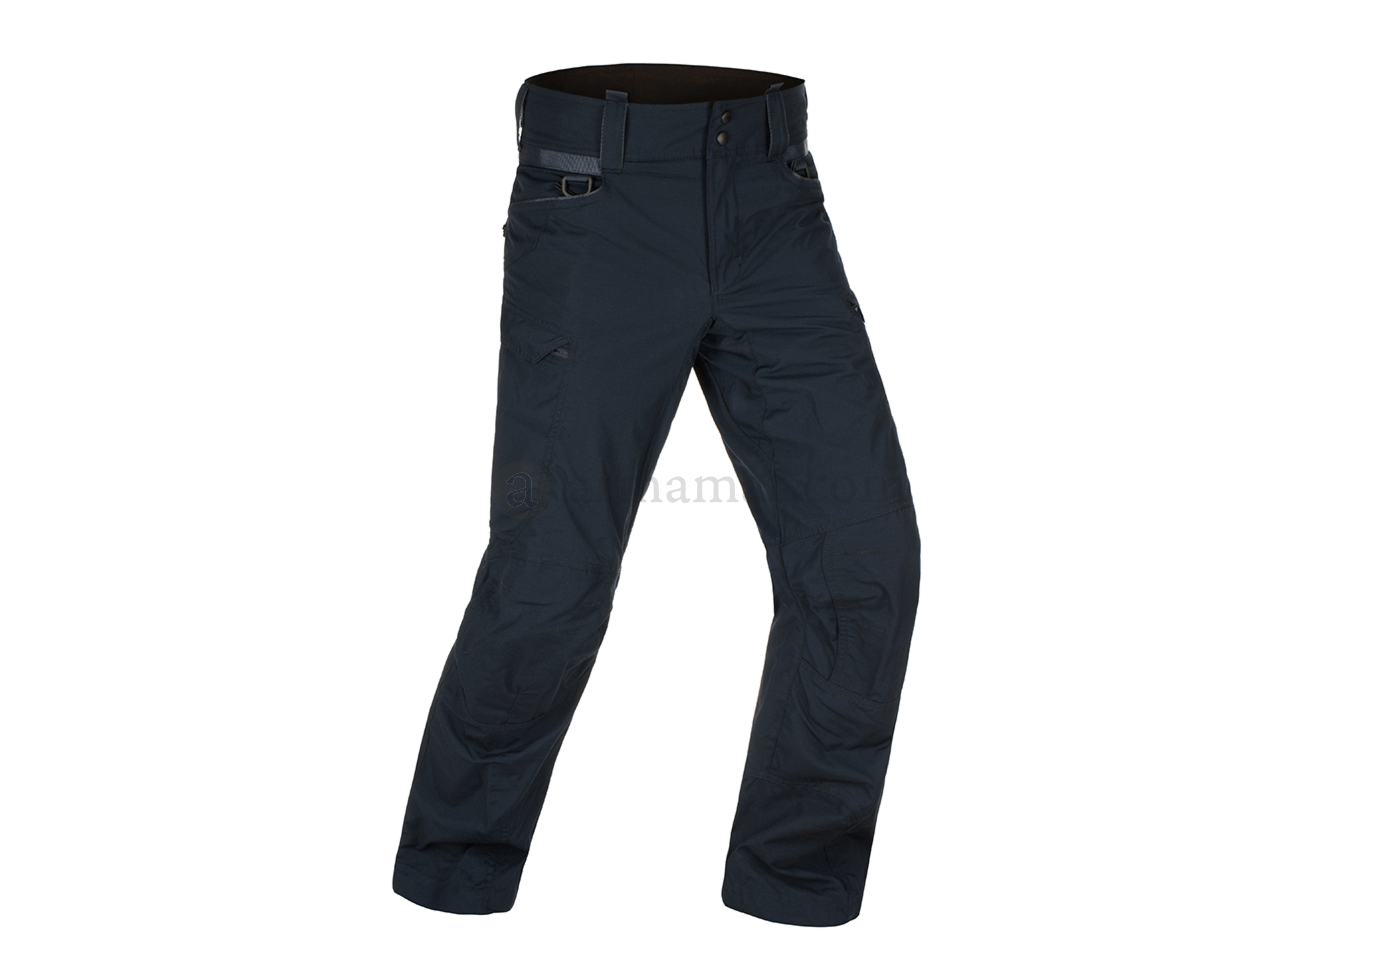 Claw Gear OPERATOR COMBAT PANTS Navy Blue